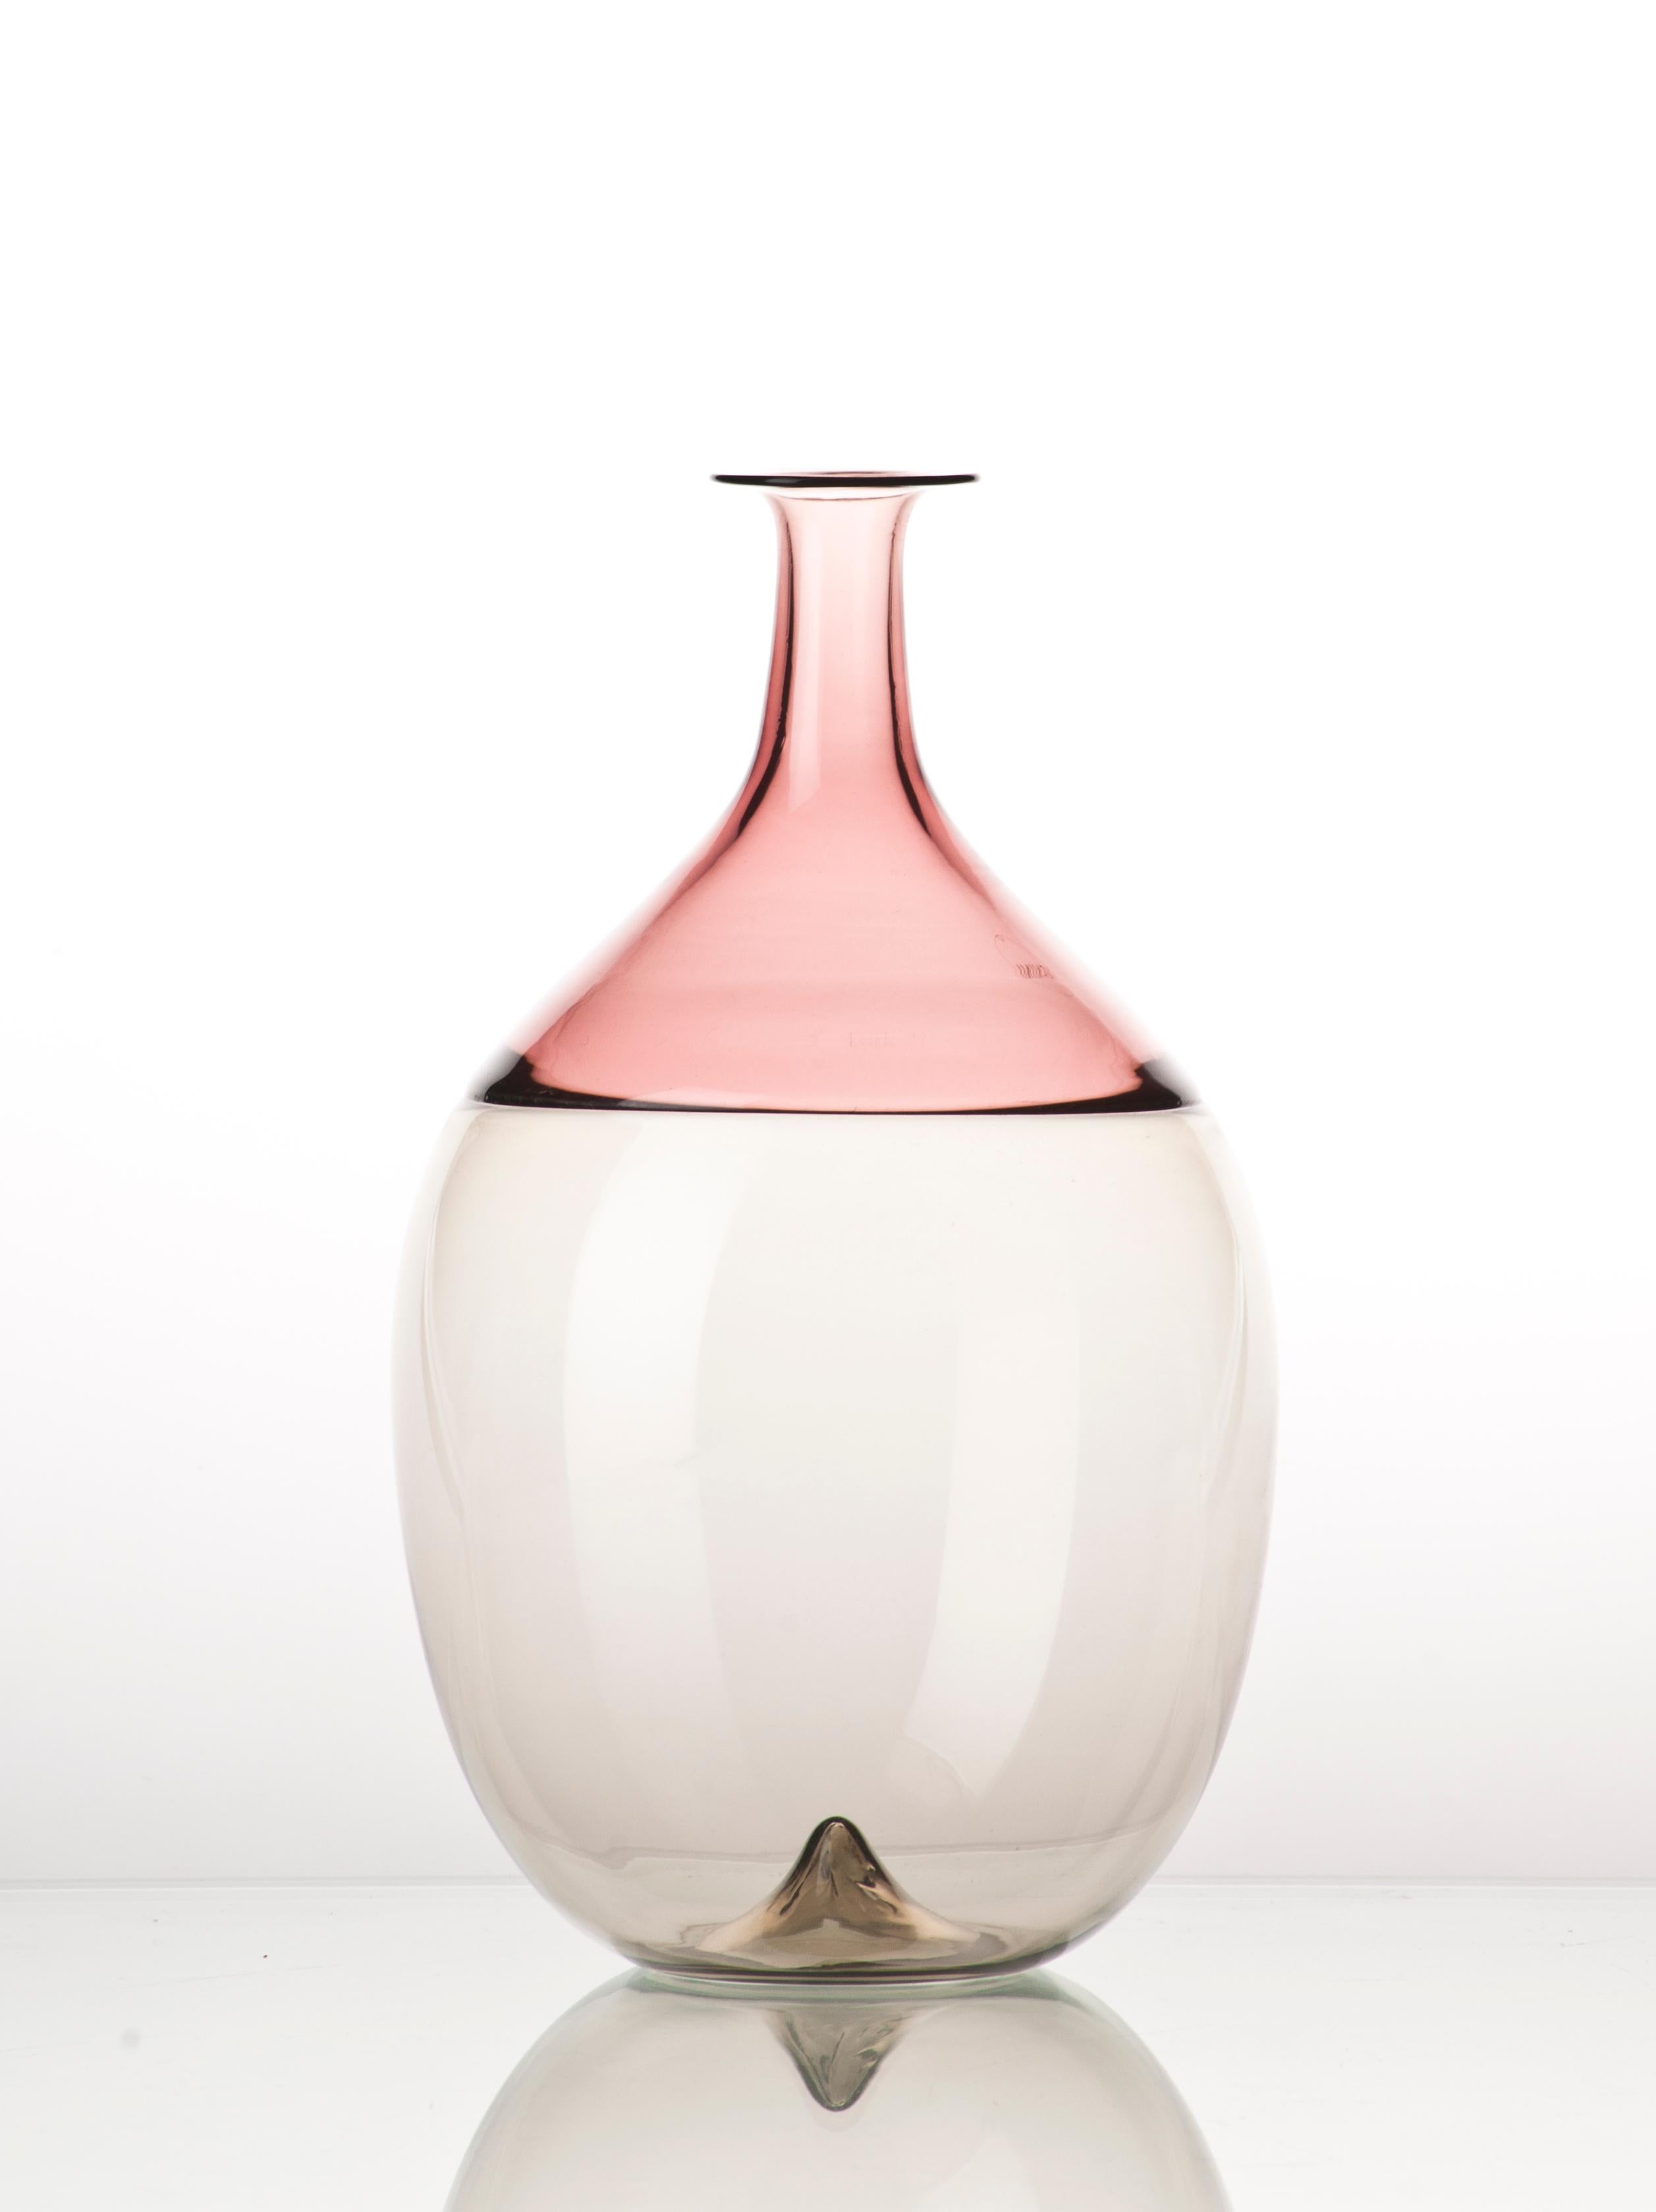 Bolle Glass vase series, designed by Tapio Wirkkala and manufactured by Venini, was originally designed in 1966. Iconic masterpieces available in 5 different shapes. Indoor use only.

Dimensions: Ø 13 cm, H 21 cm.
 